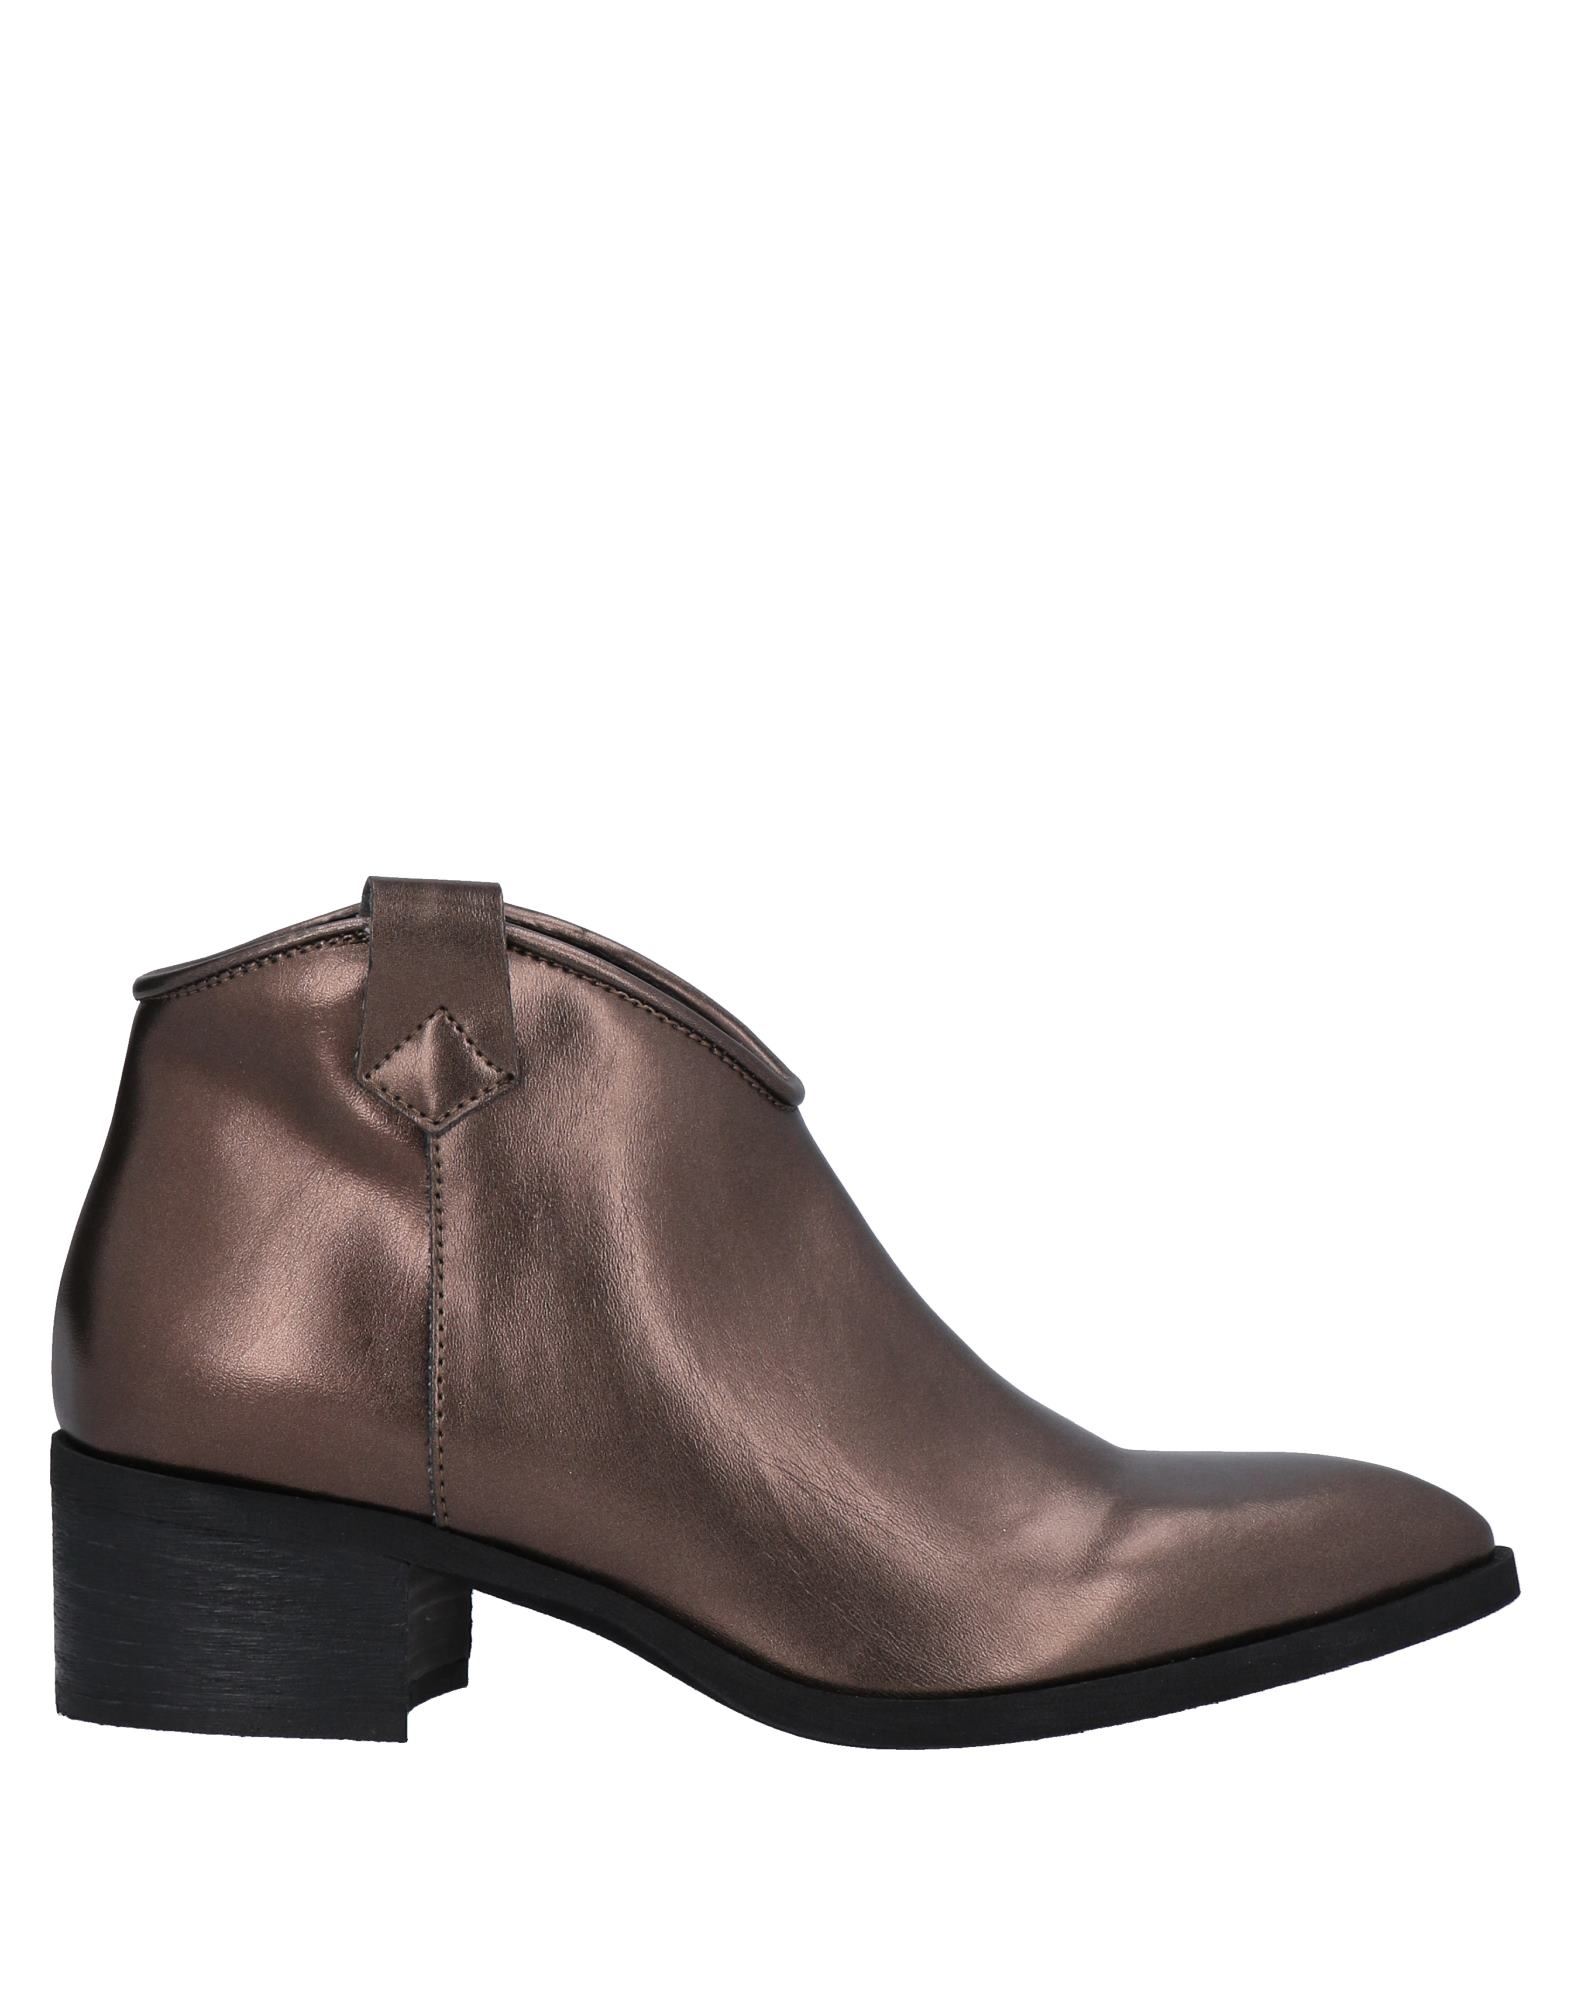 Tsd12 Ankle Boots In Bronze